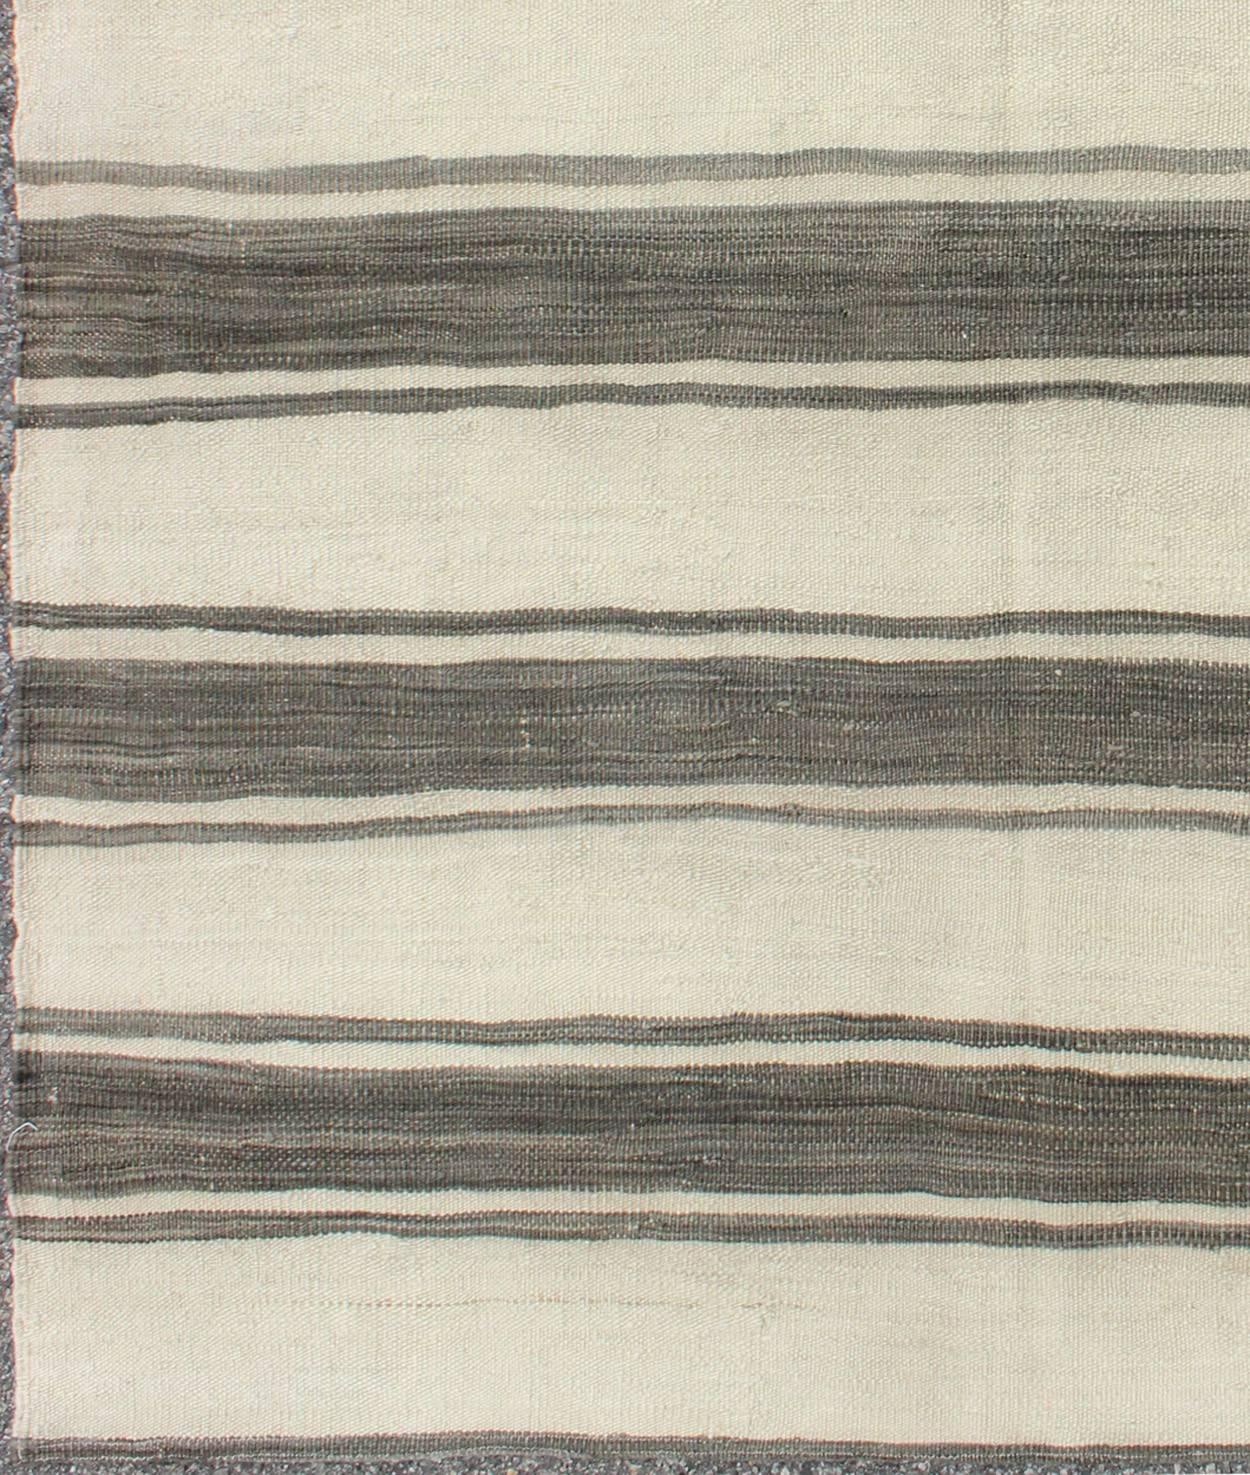 Modern design vintage Turkish Kilim rug in cream with horizontal gray stripes, rug en-165668, country of origin / type: Turkey / Kilim, circa mid-20th century

Woven during the mid-20th century in Turkey, this designer Kilim is decorated with a